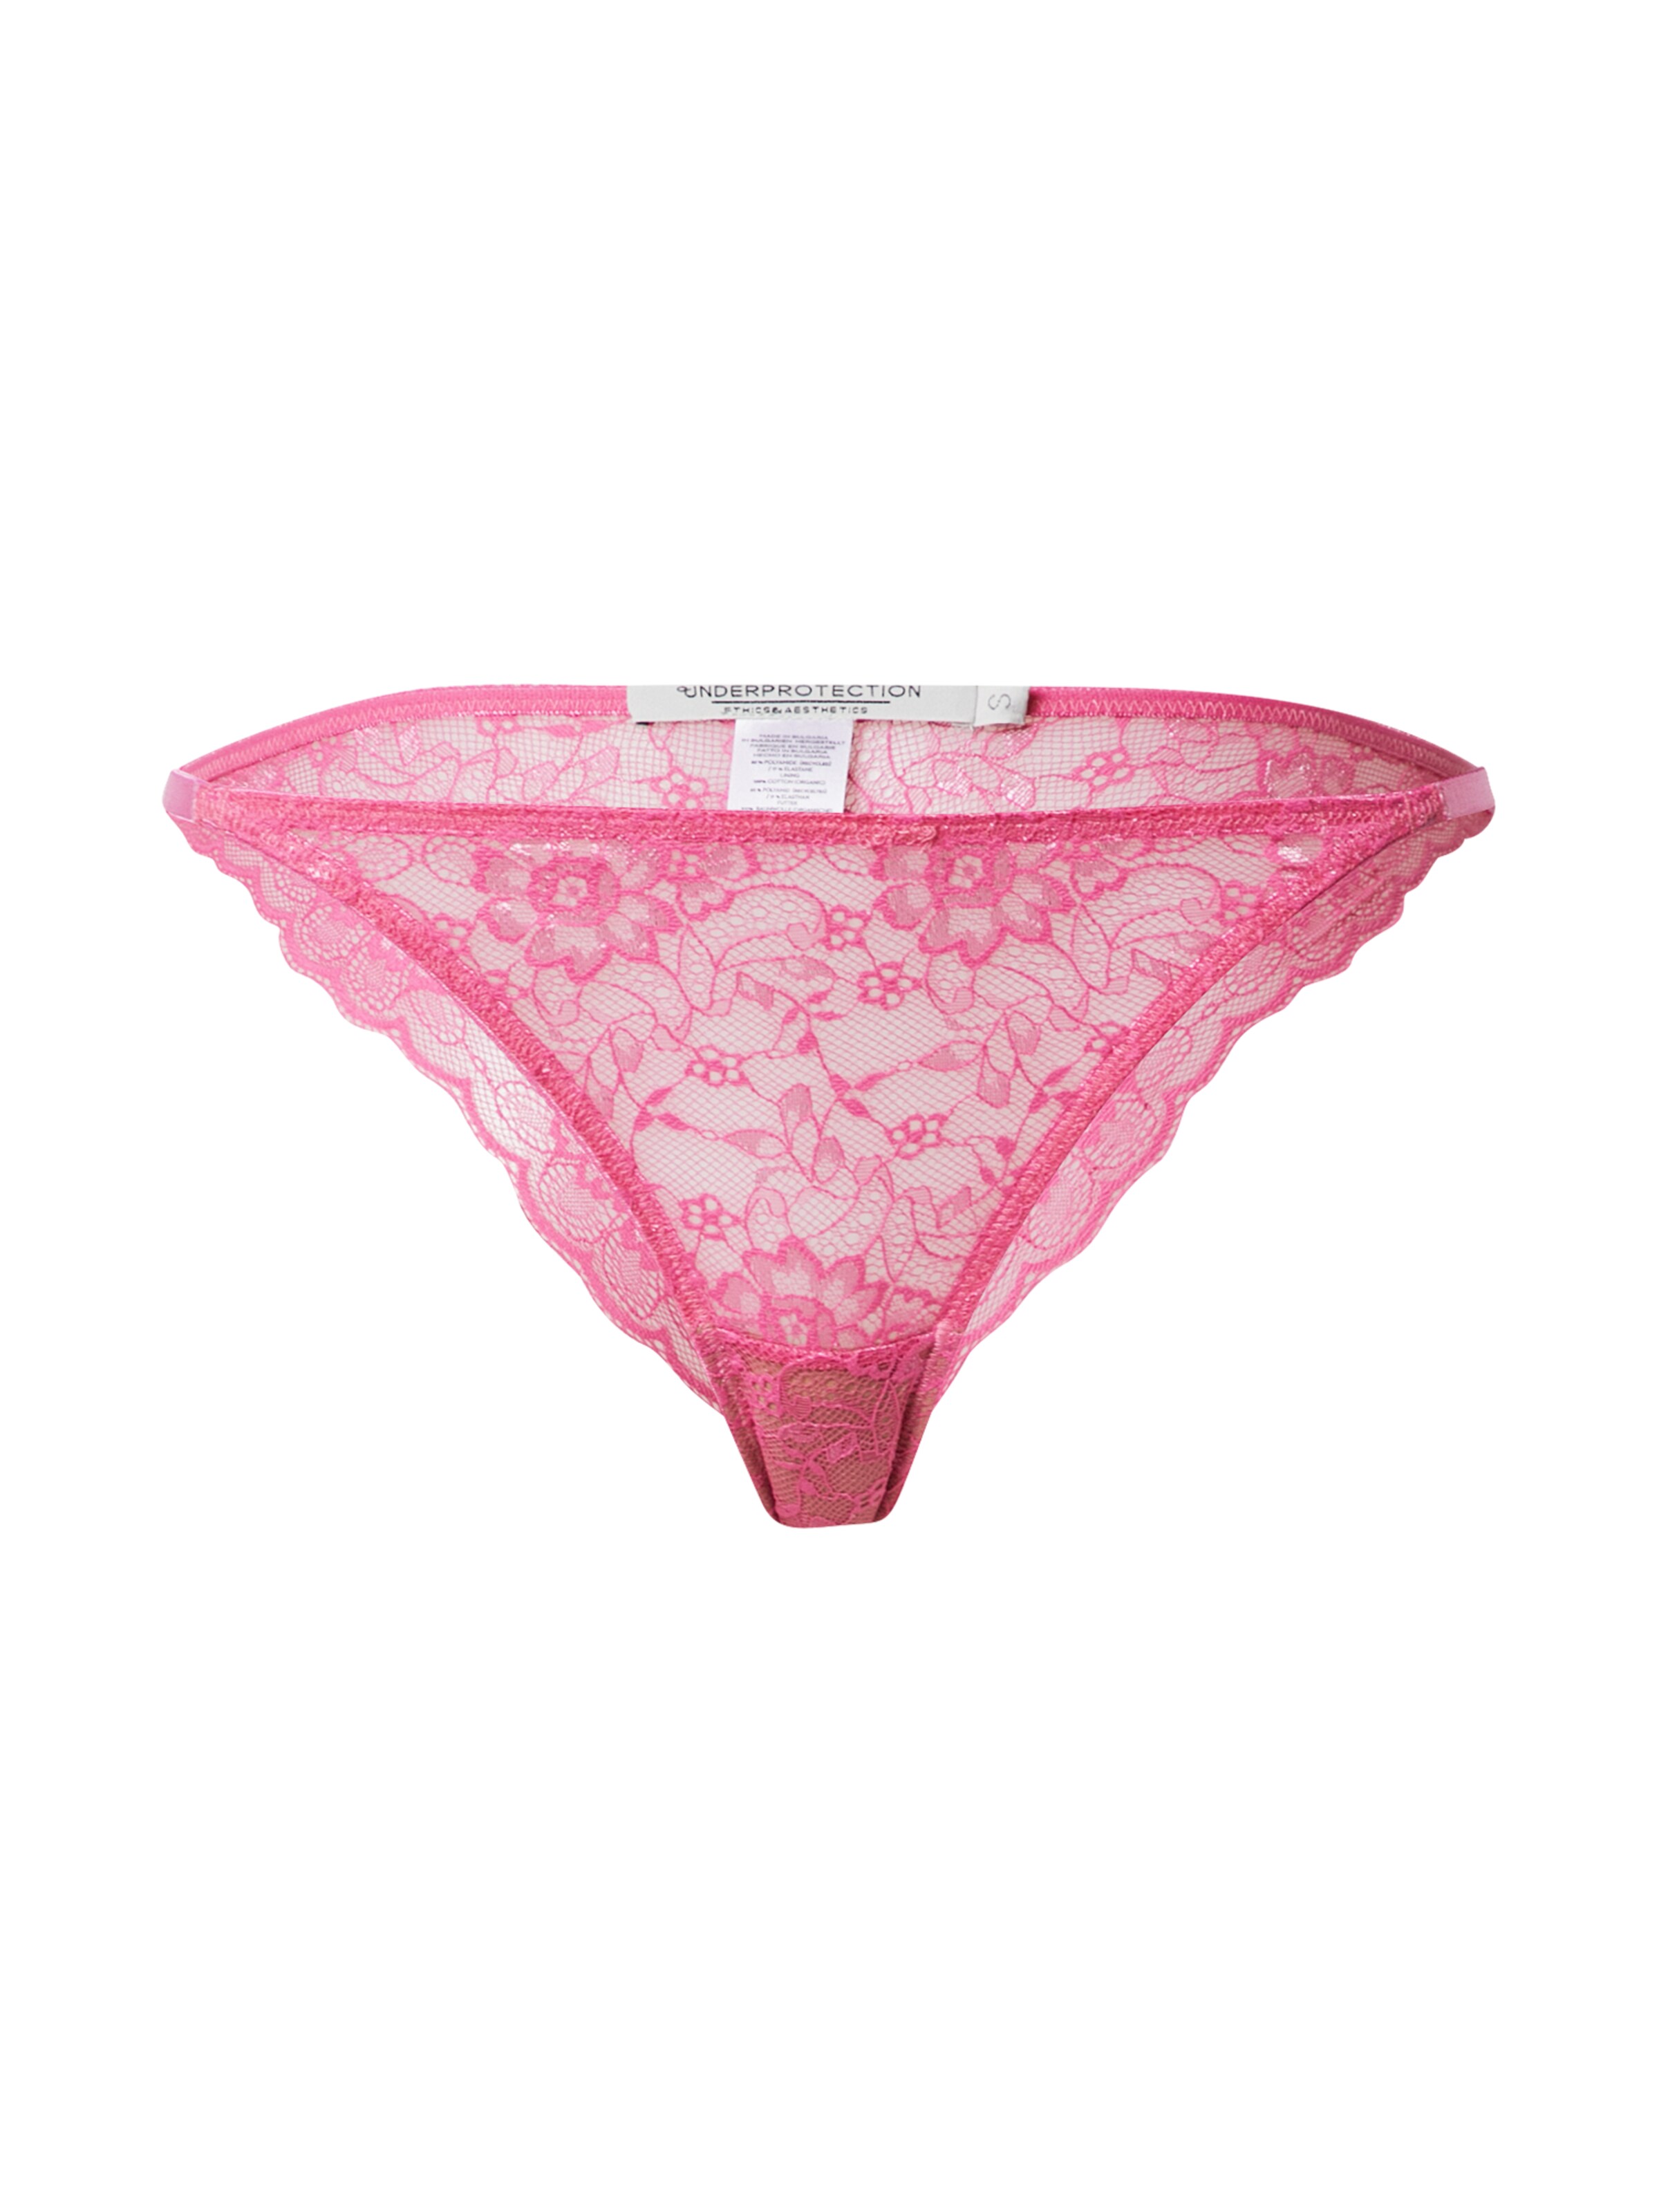 Underprotection Slip Amy in Rosa 